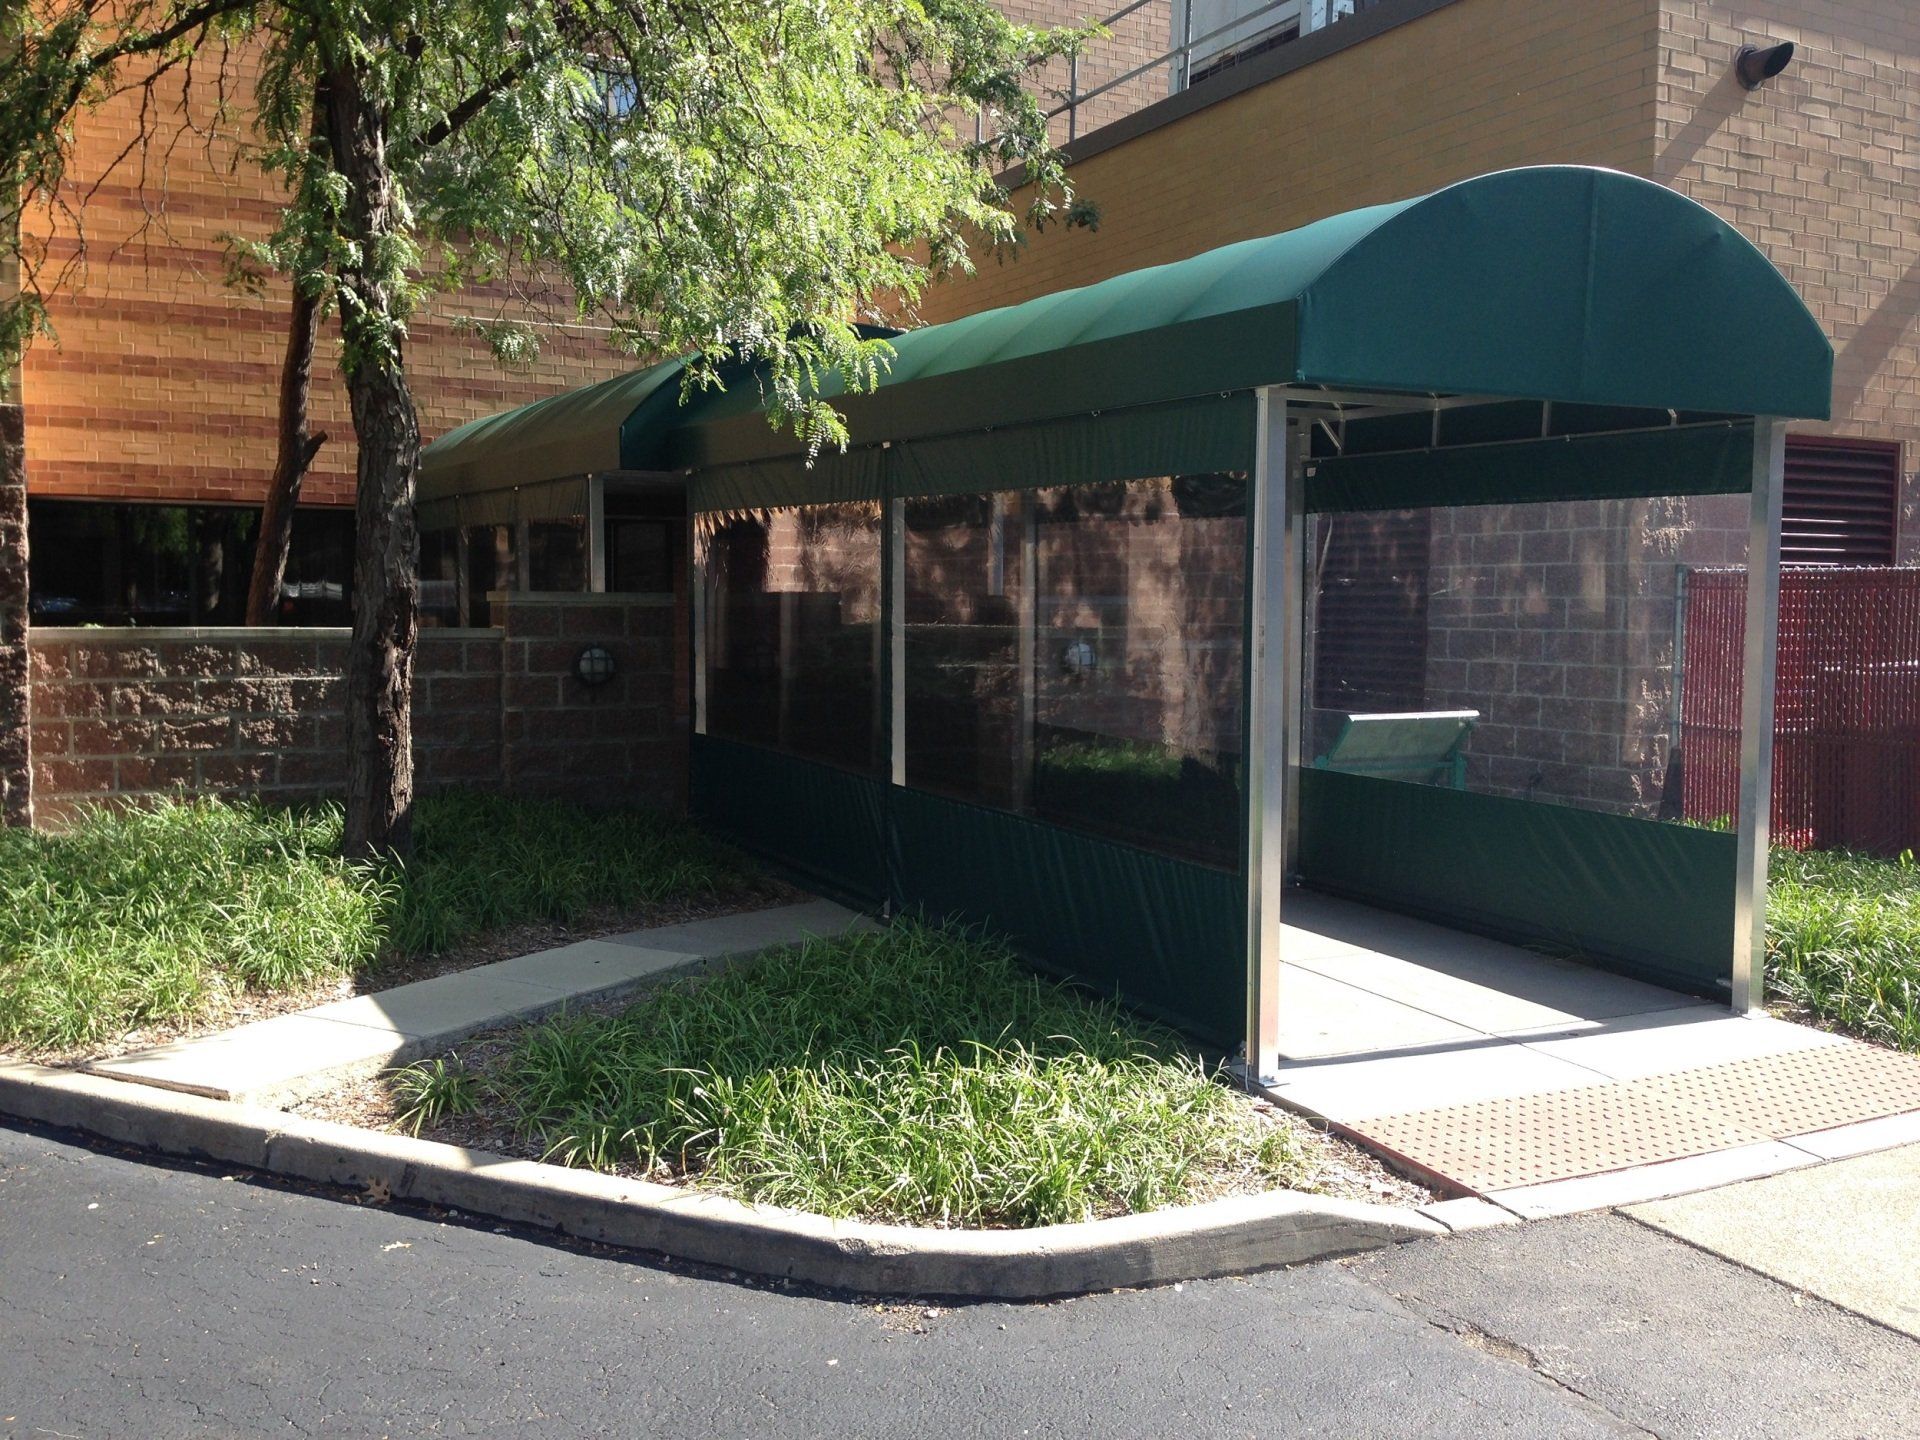 Commercial awning-11 — Custom awnings in Pittsburgh, PA